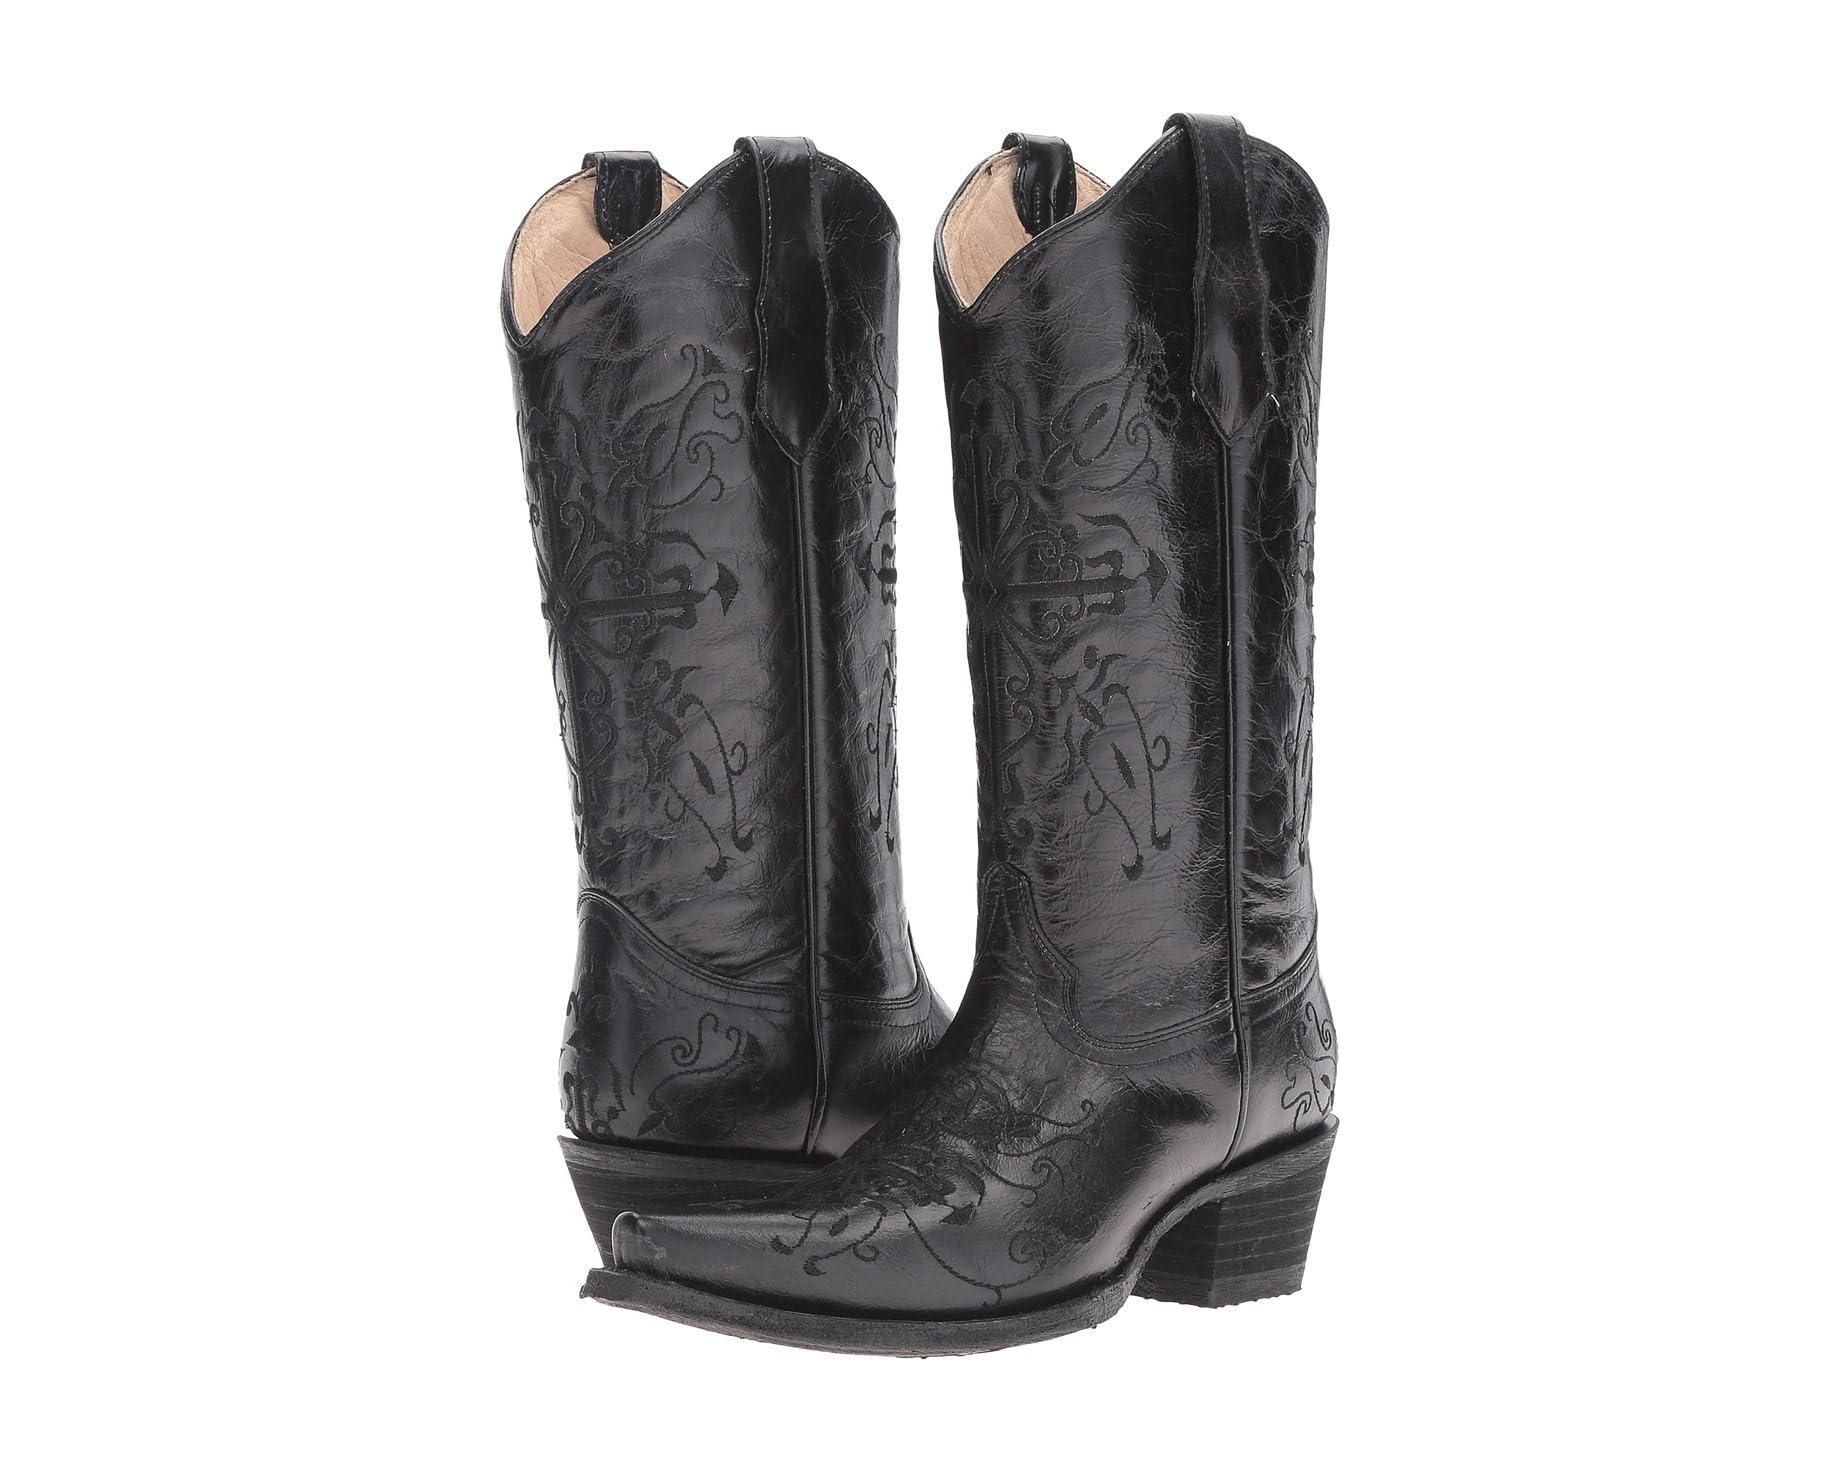 Black Embroidered Ladies Boots by Circle G